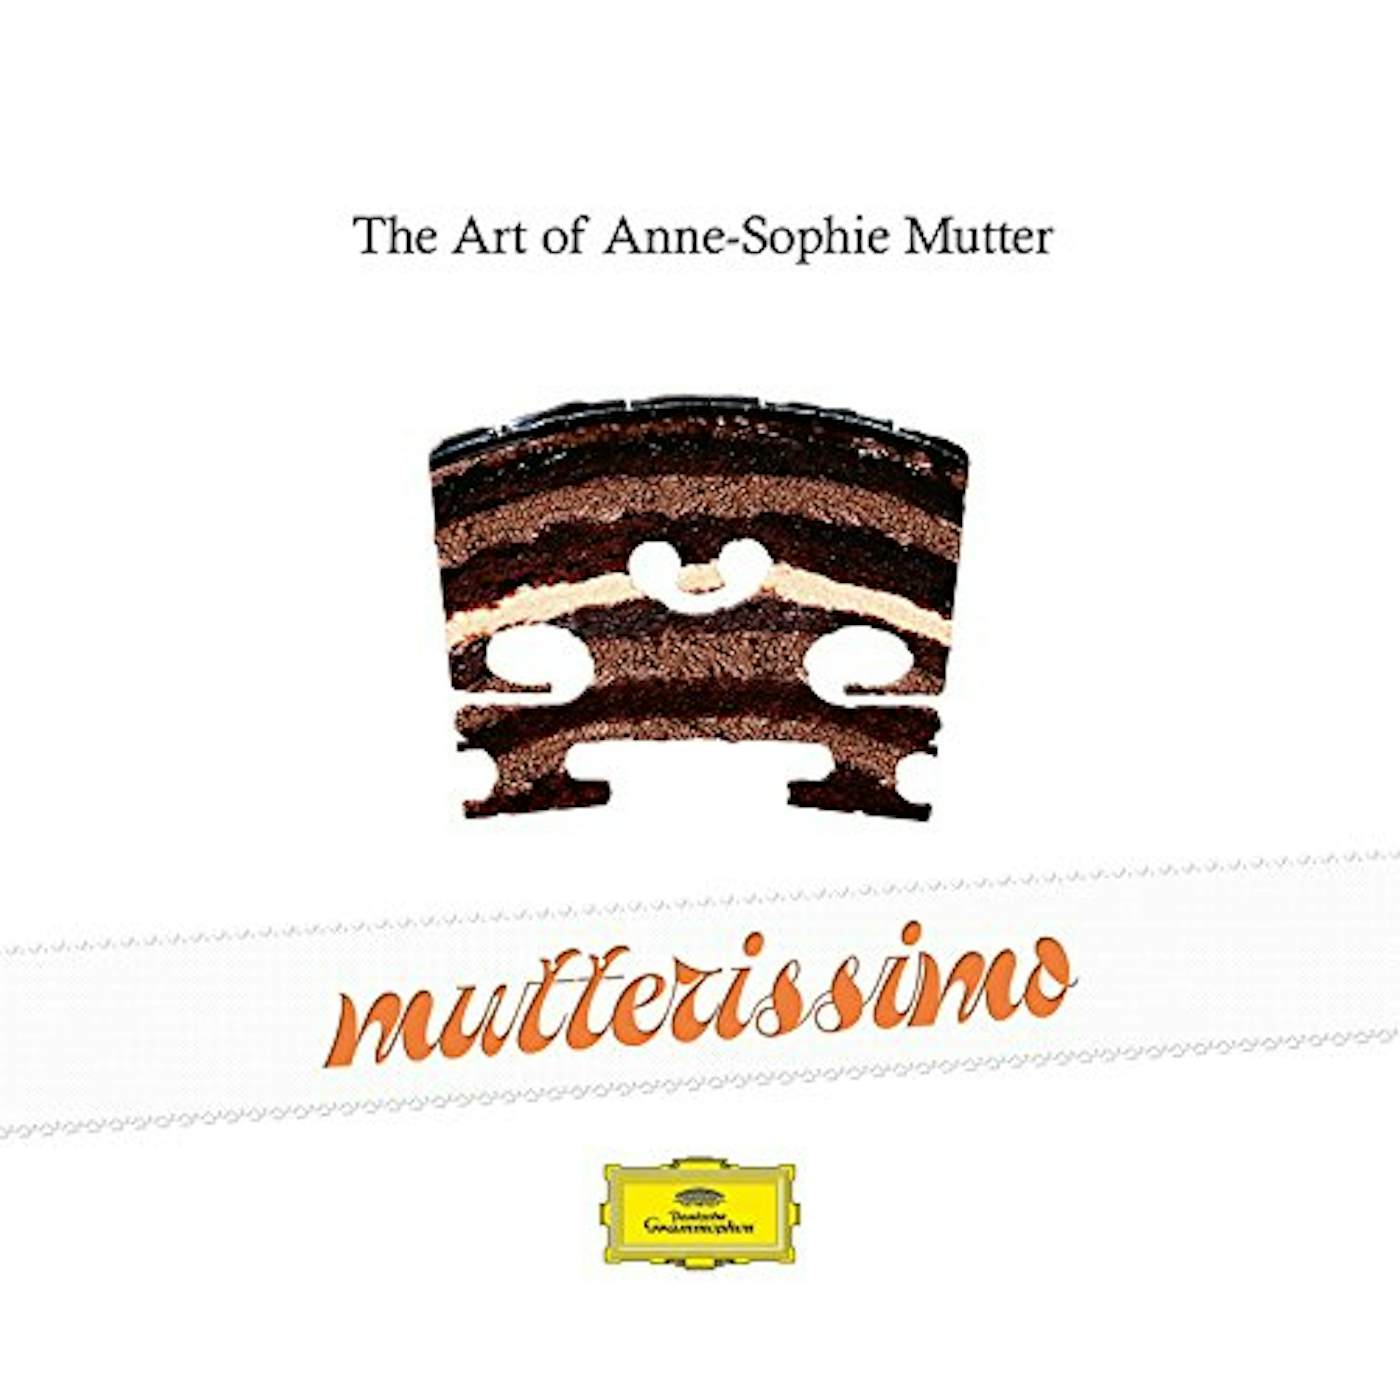 MUTTERISSIMO - THE ART OF ANNE-SOPHIE MUTTER CD